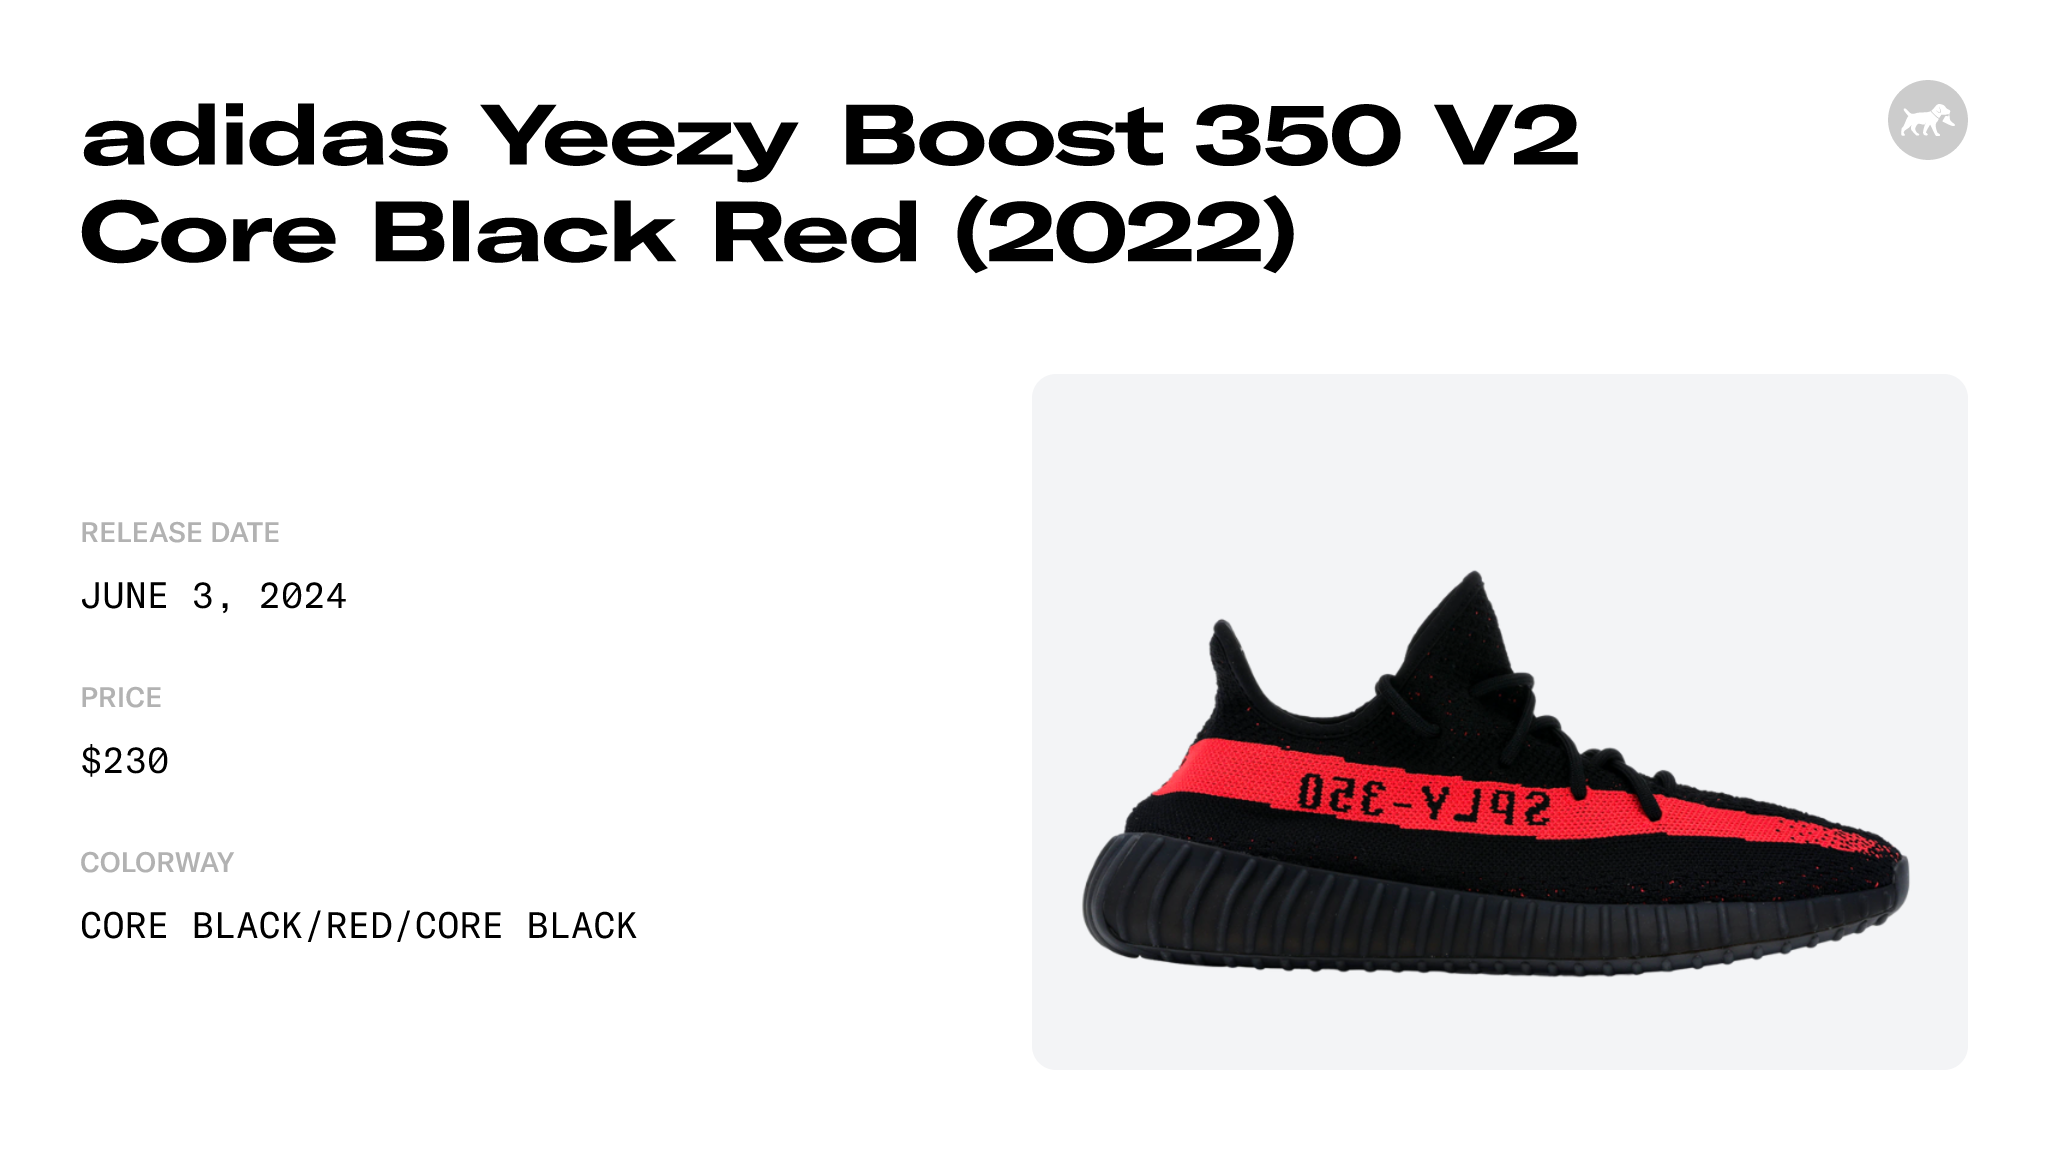 Adidas Yeezy Boost 350 V2 - Core Black/Red • Price »